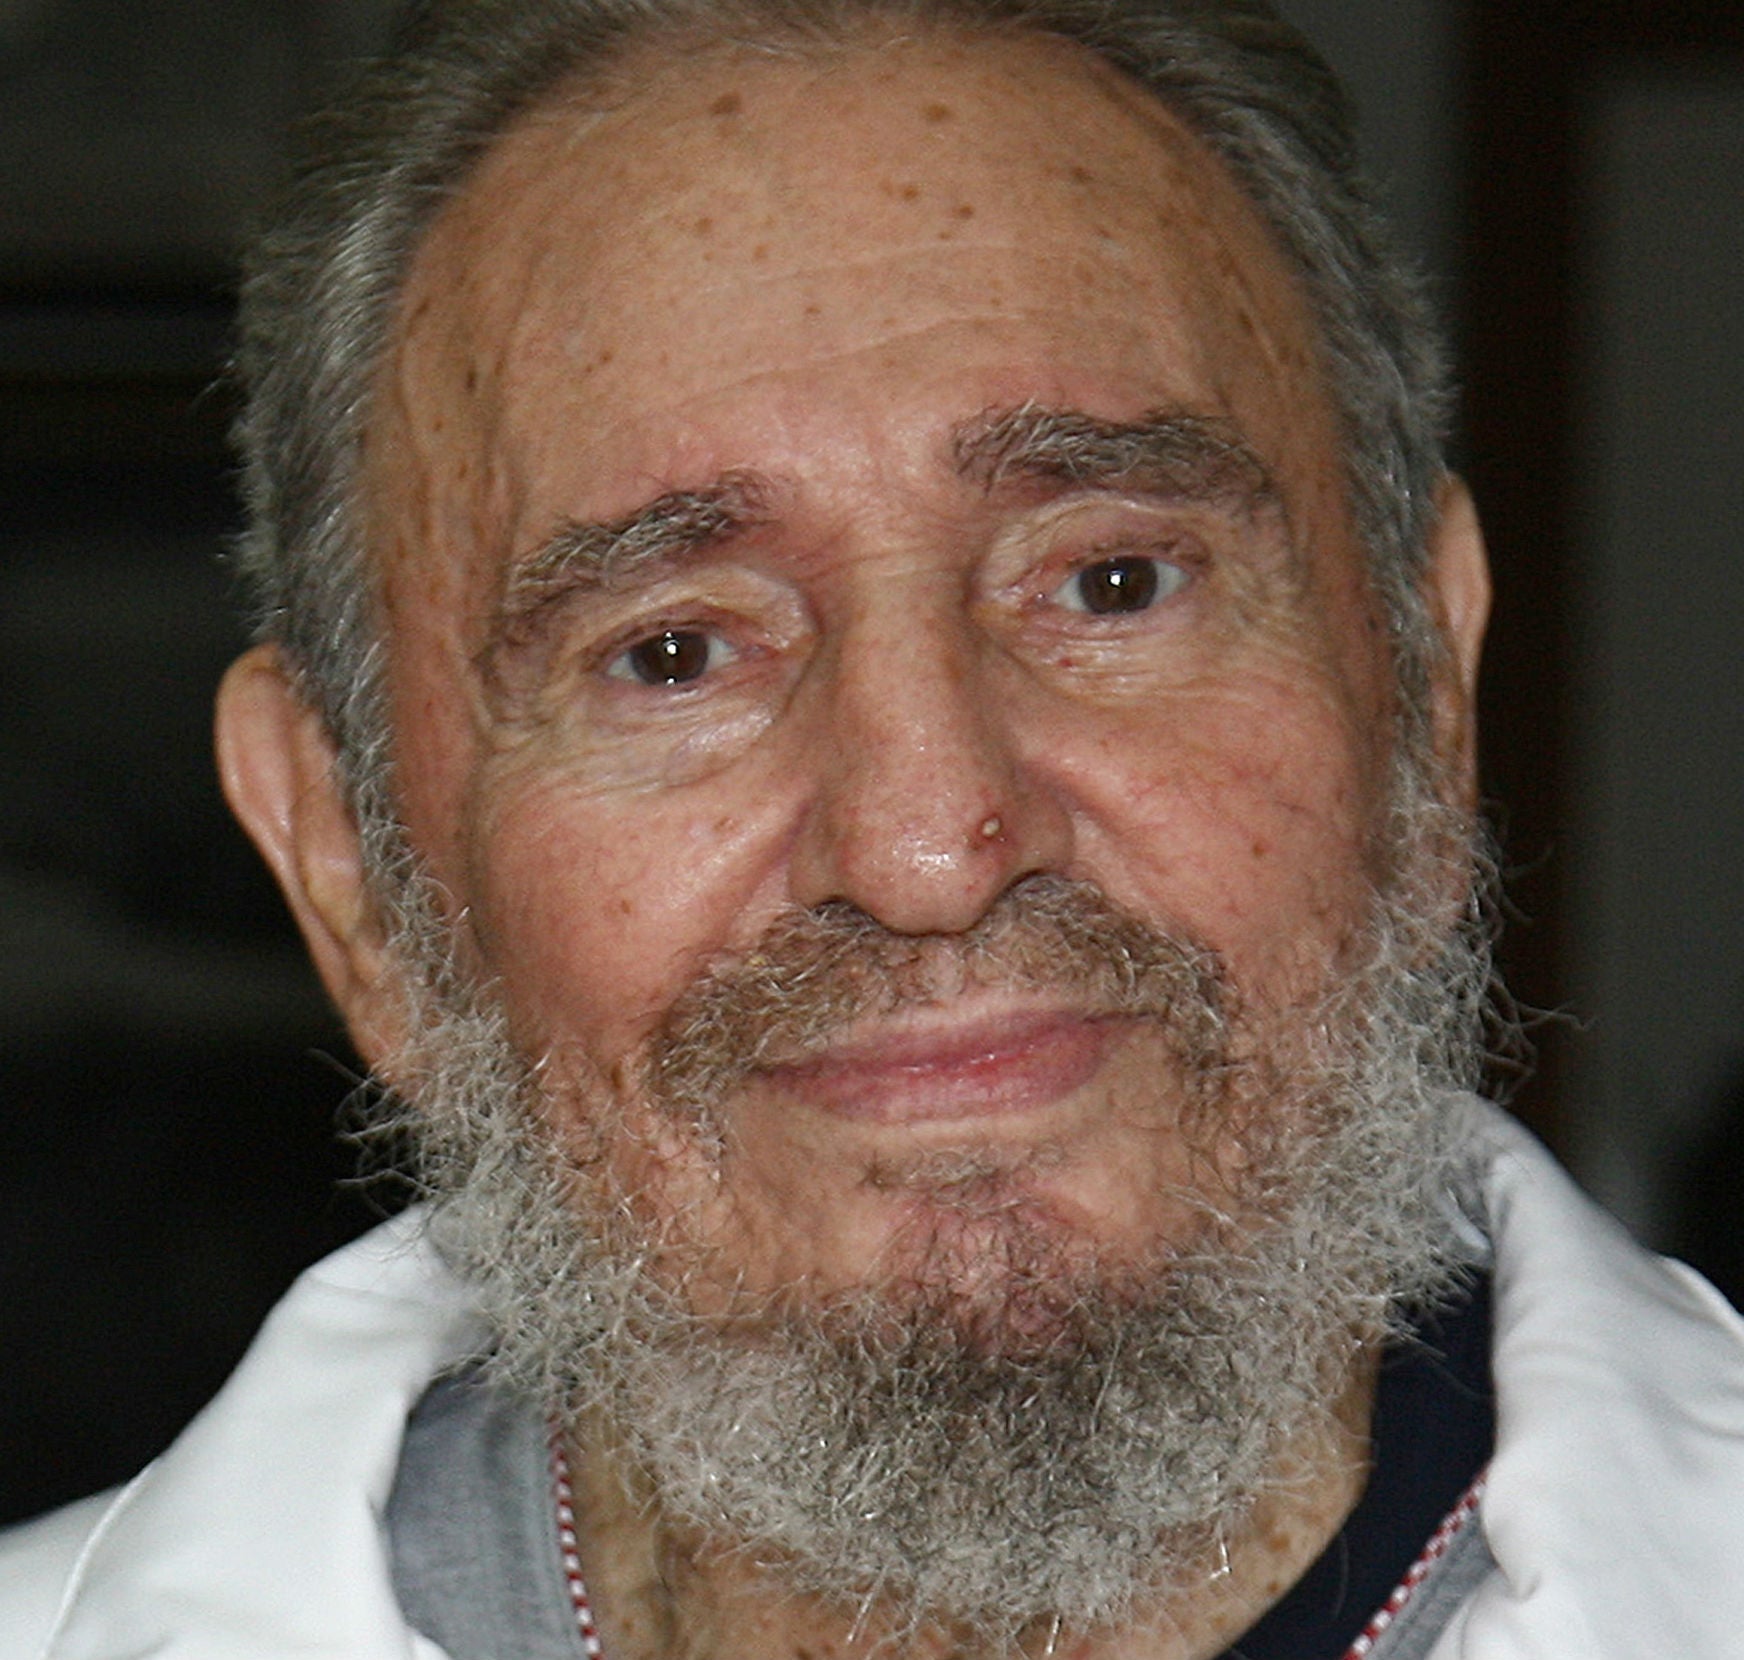 Fidel Castro penned the essay in a state-controlled newspaper